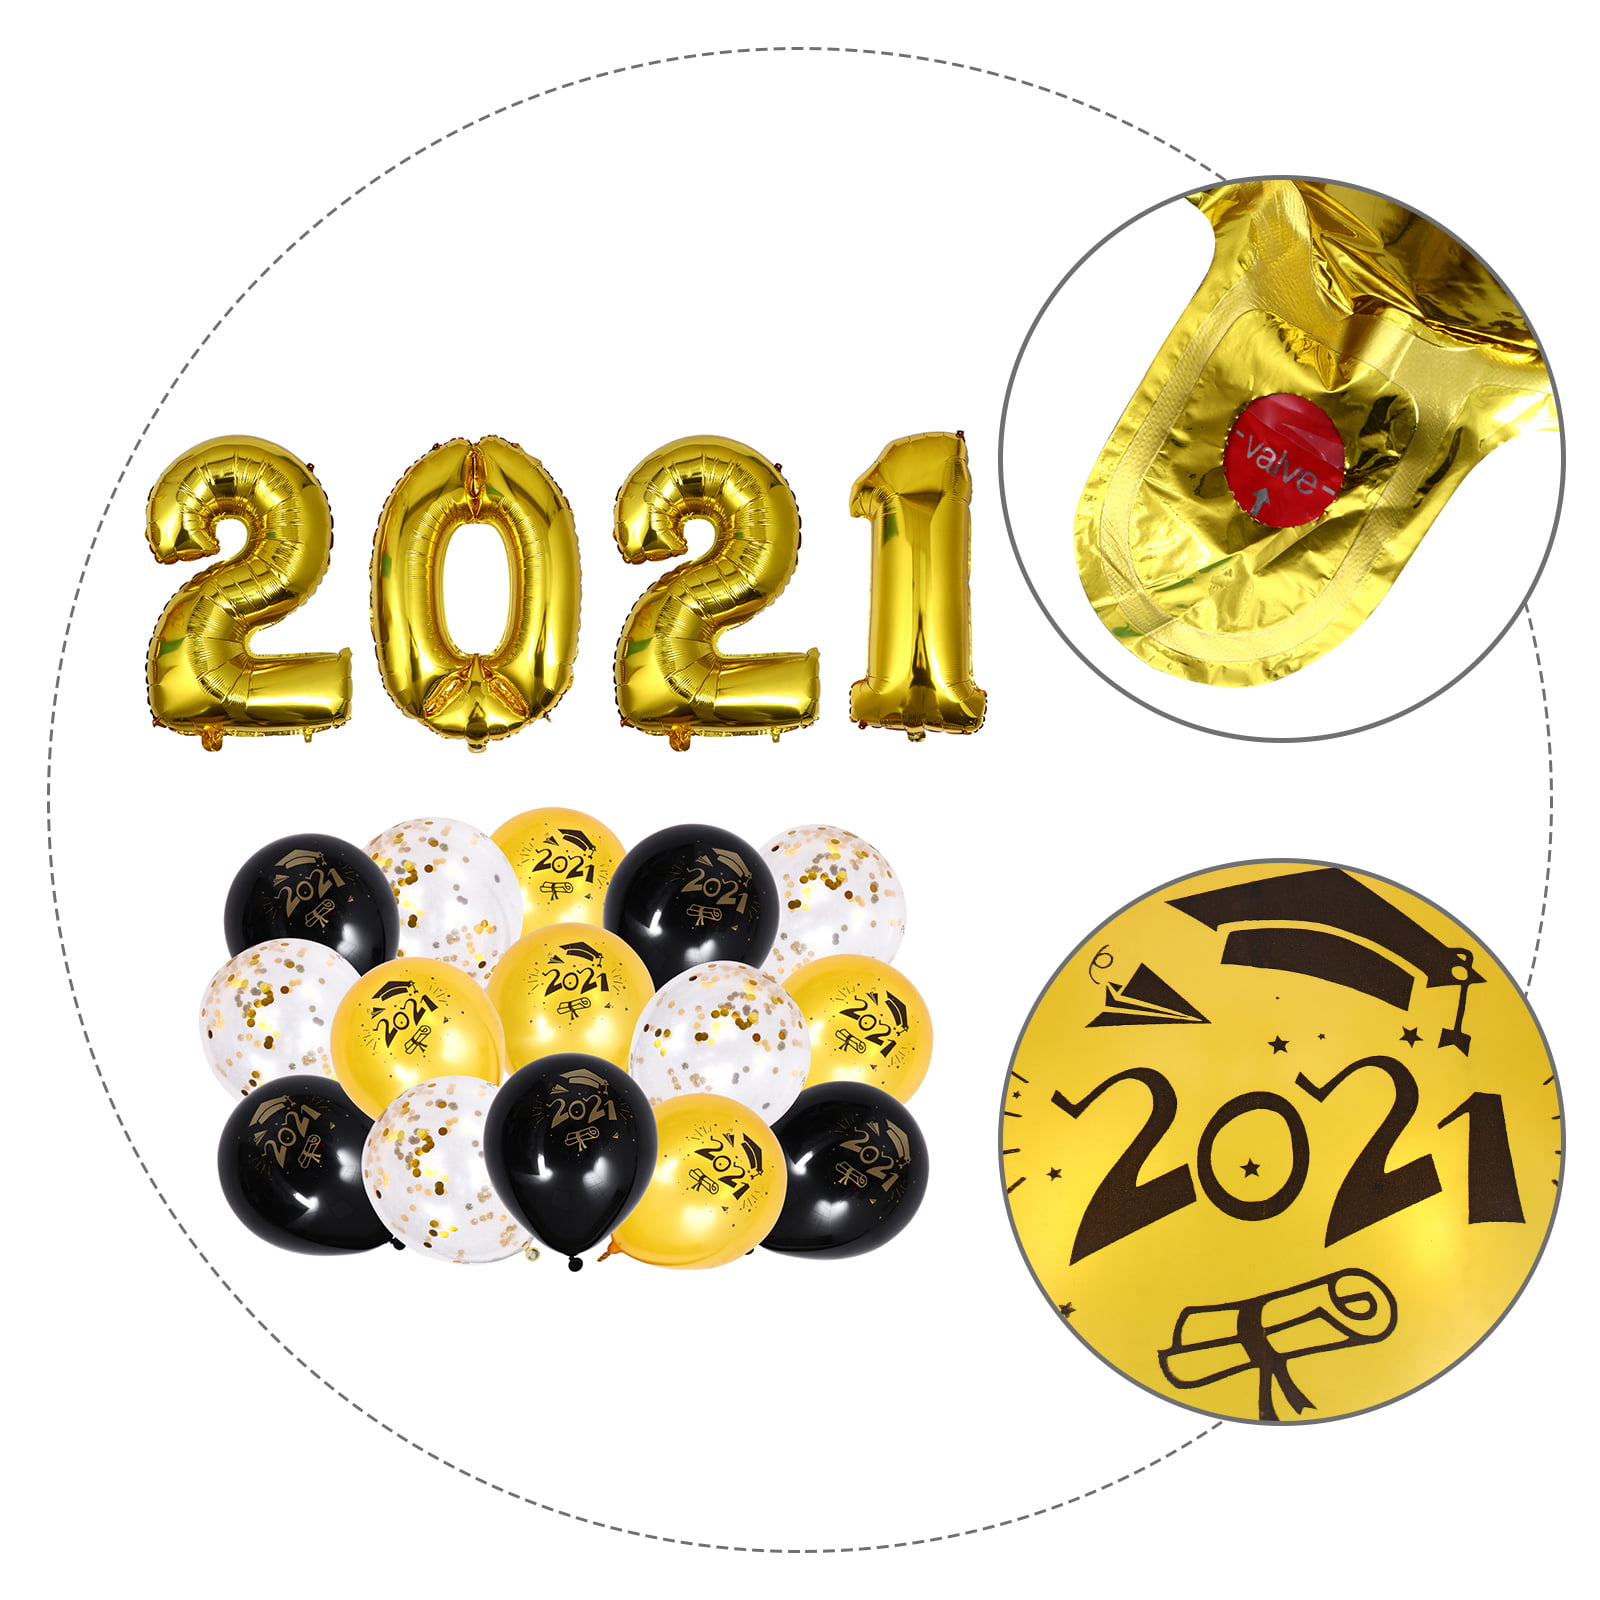 Details about   2021 Graduation Party Balloon Combination Set 2021 Foil Polyester Film Balloons 